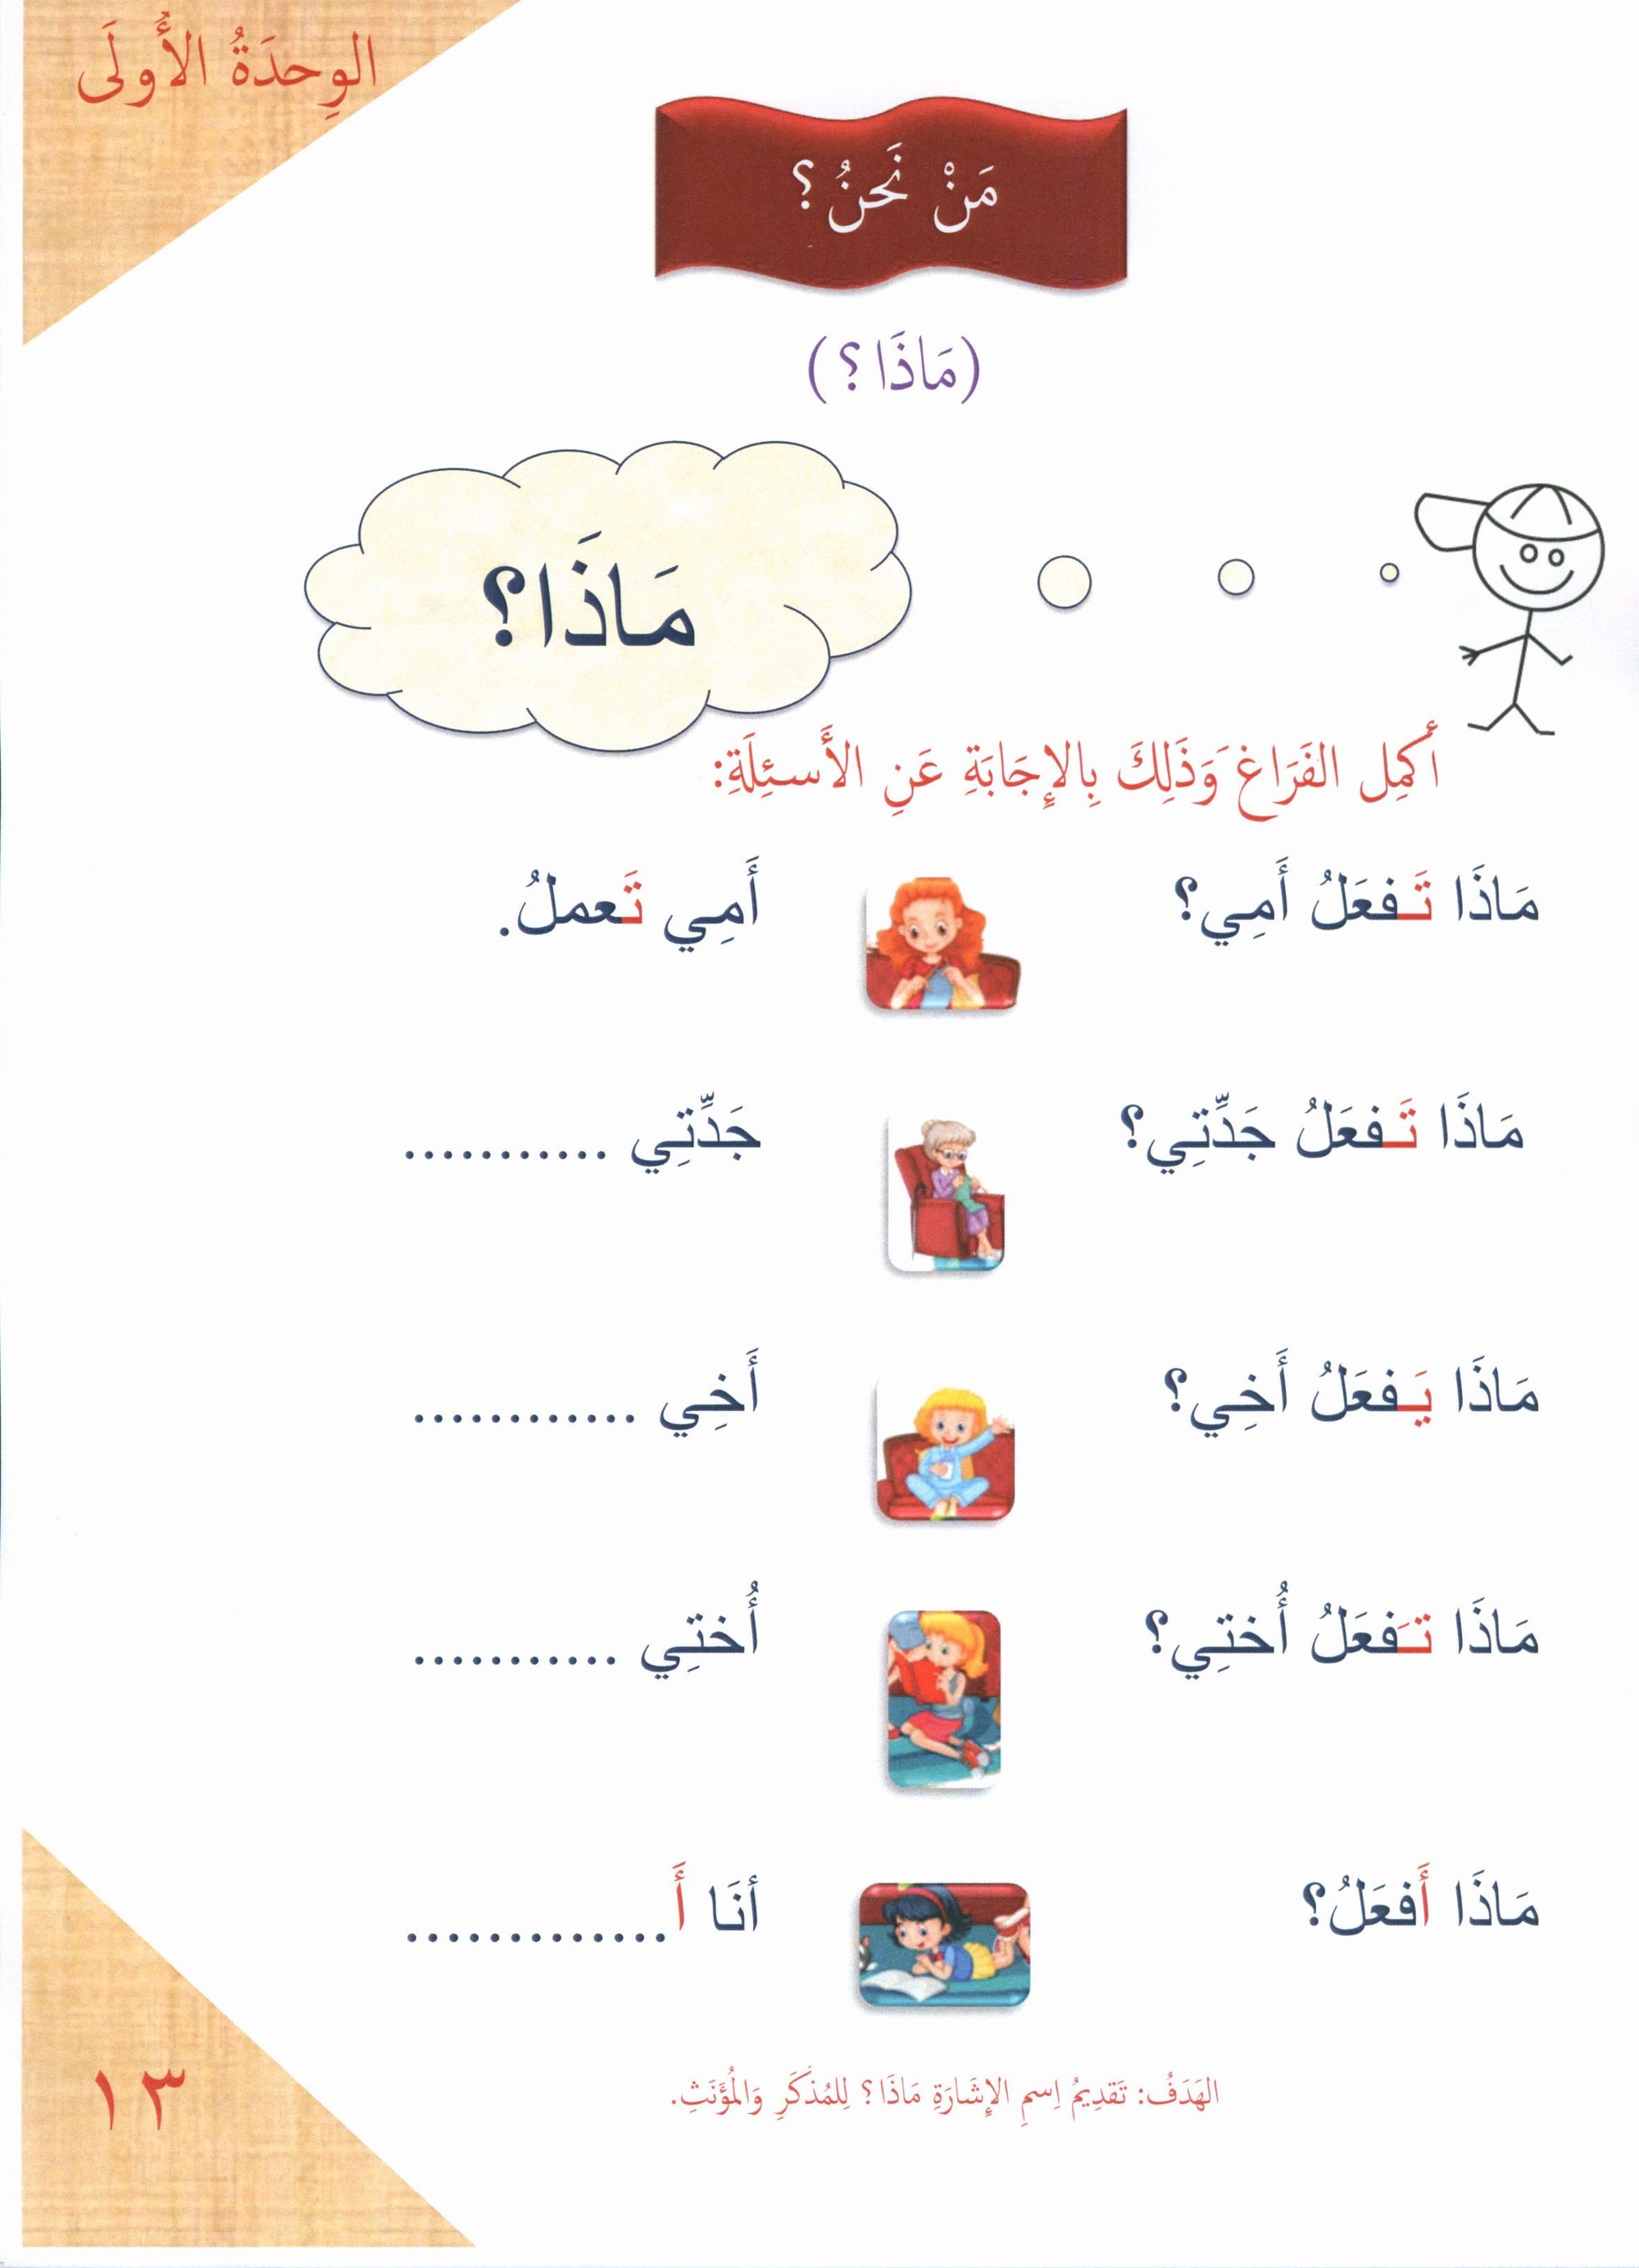 Our Language Is Our Pride Reading Level 1 لغتنا فخرنا